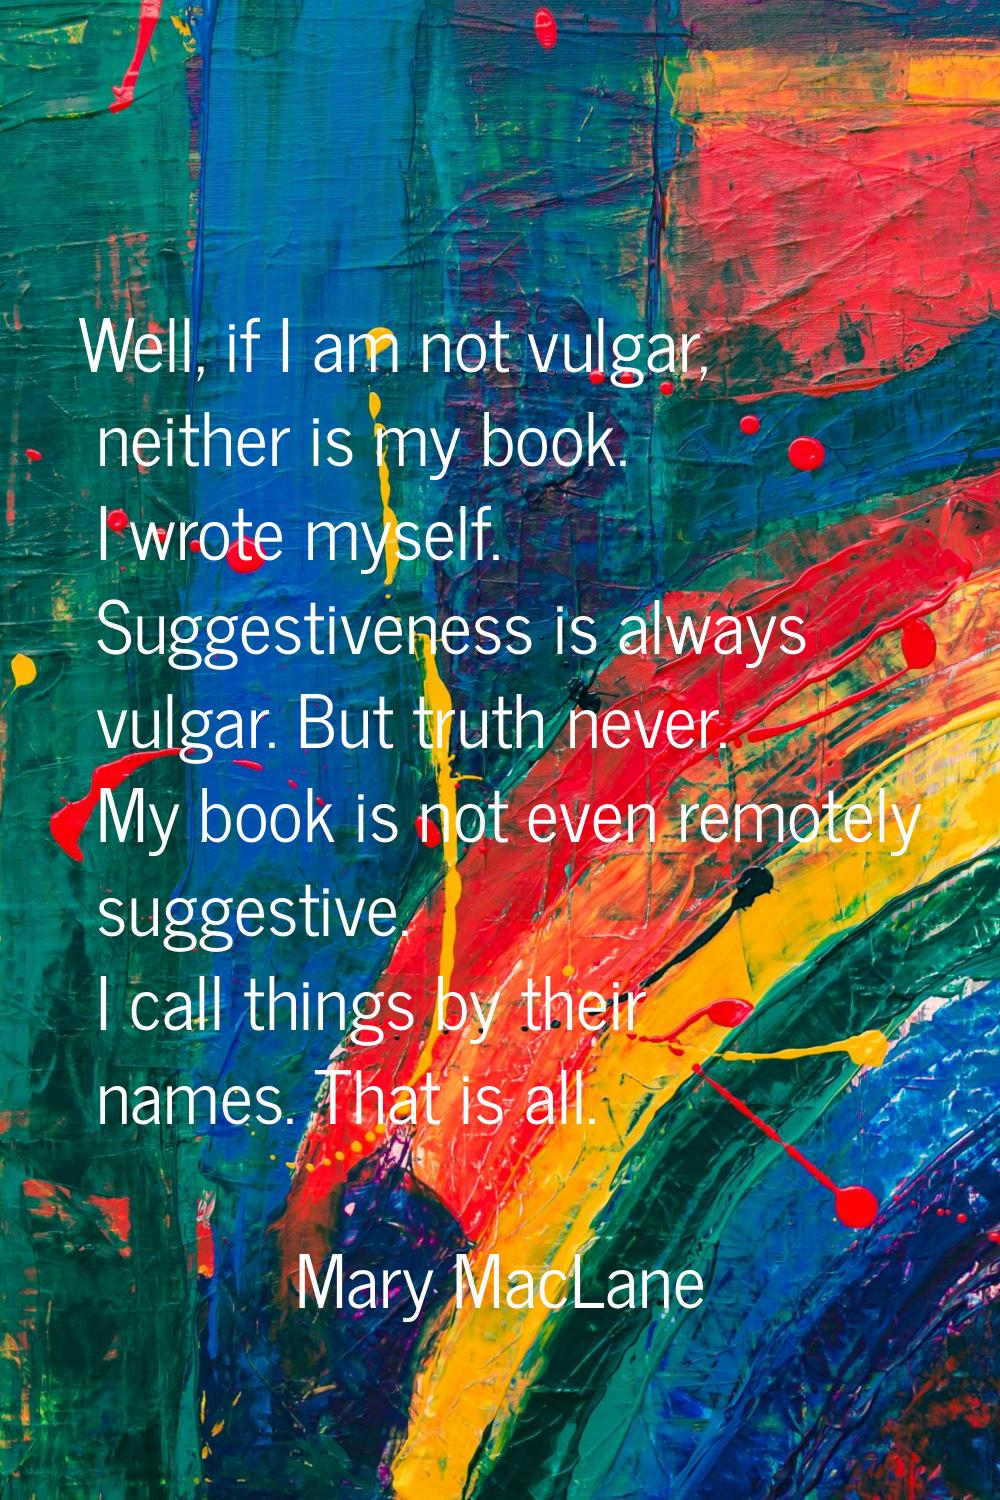 Well, if I am not vulgar, neither is my book. I wrote myself. Suggestiveness is always vulgar. But 